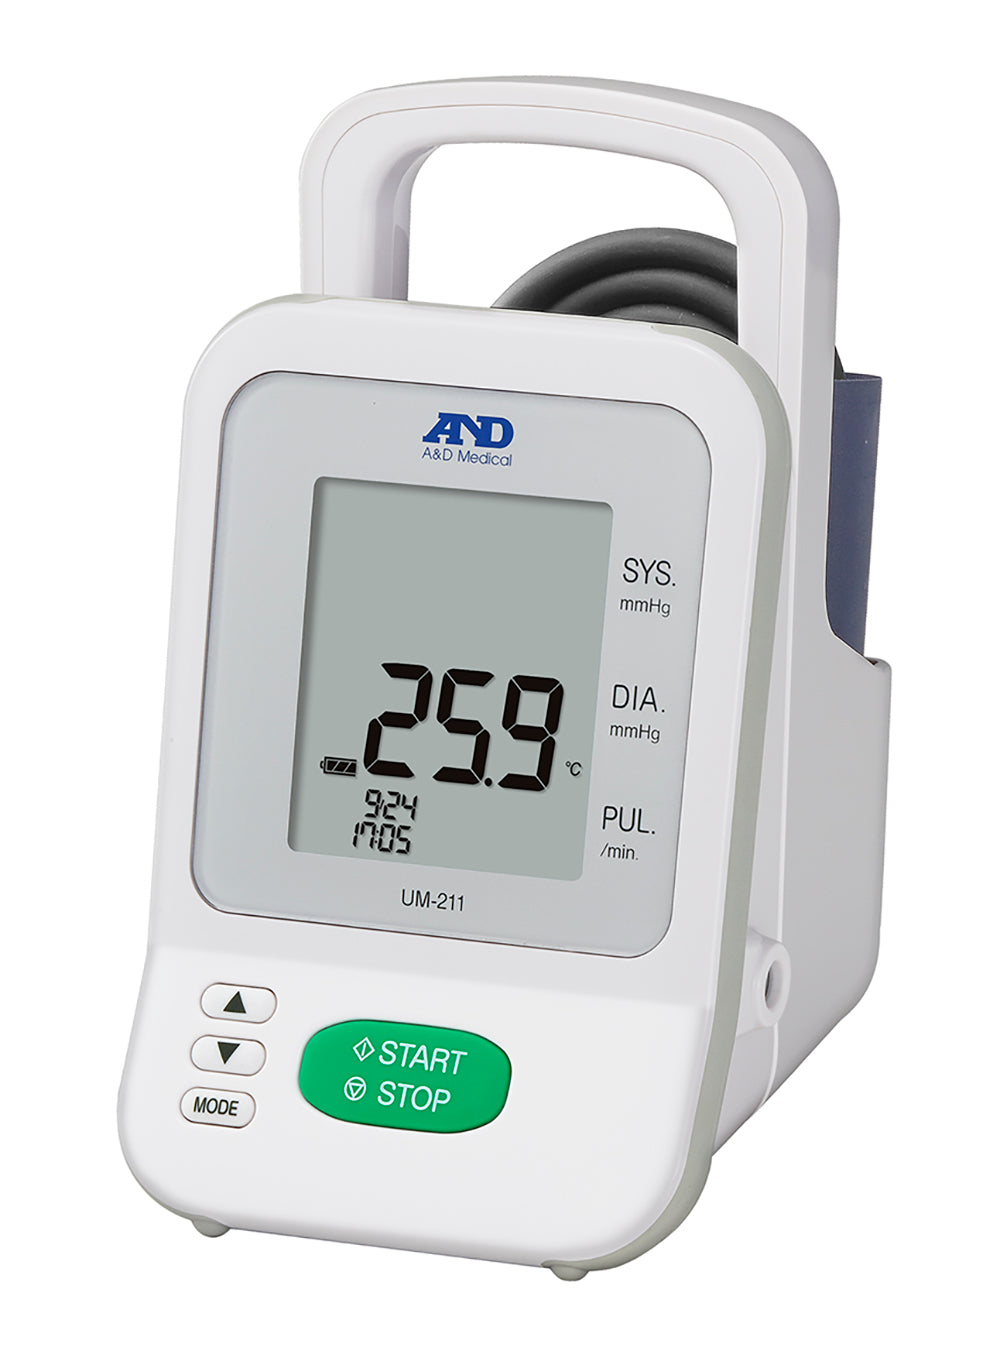 A&D - Professional upper arm blood pressure monitor - Dual mode of automatic or manual sphygmomanometer